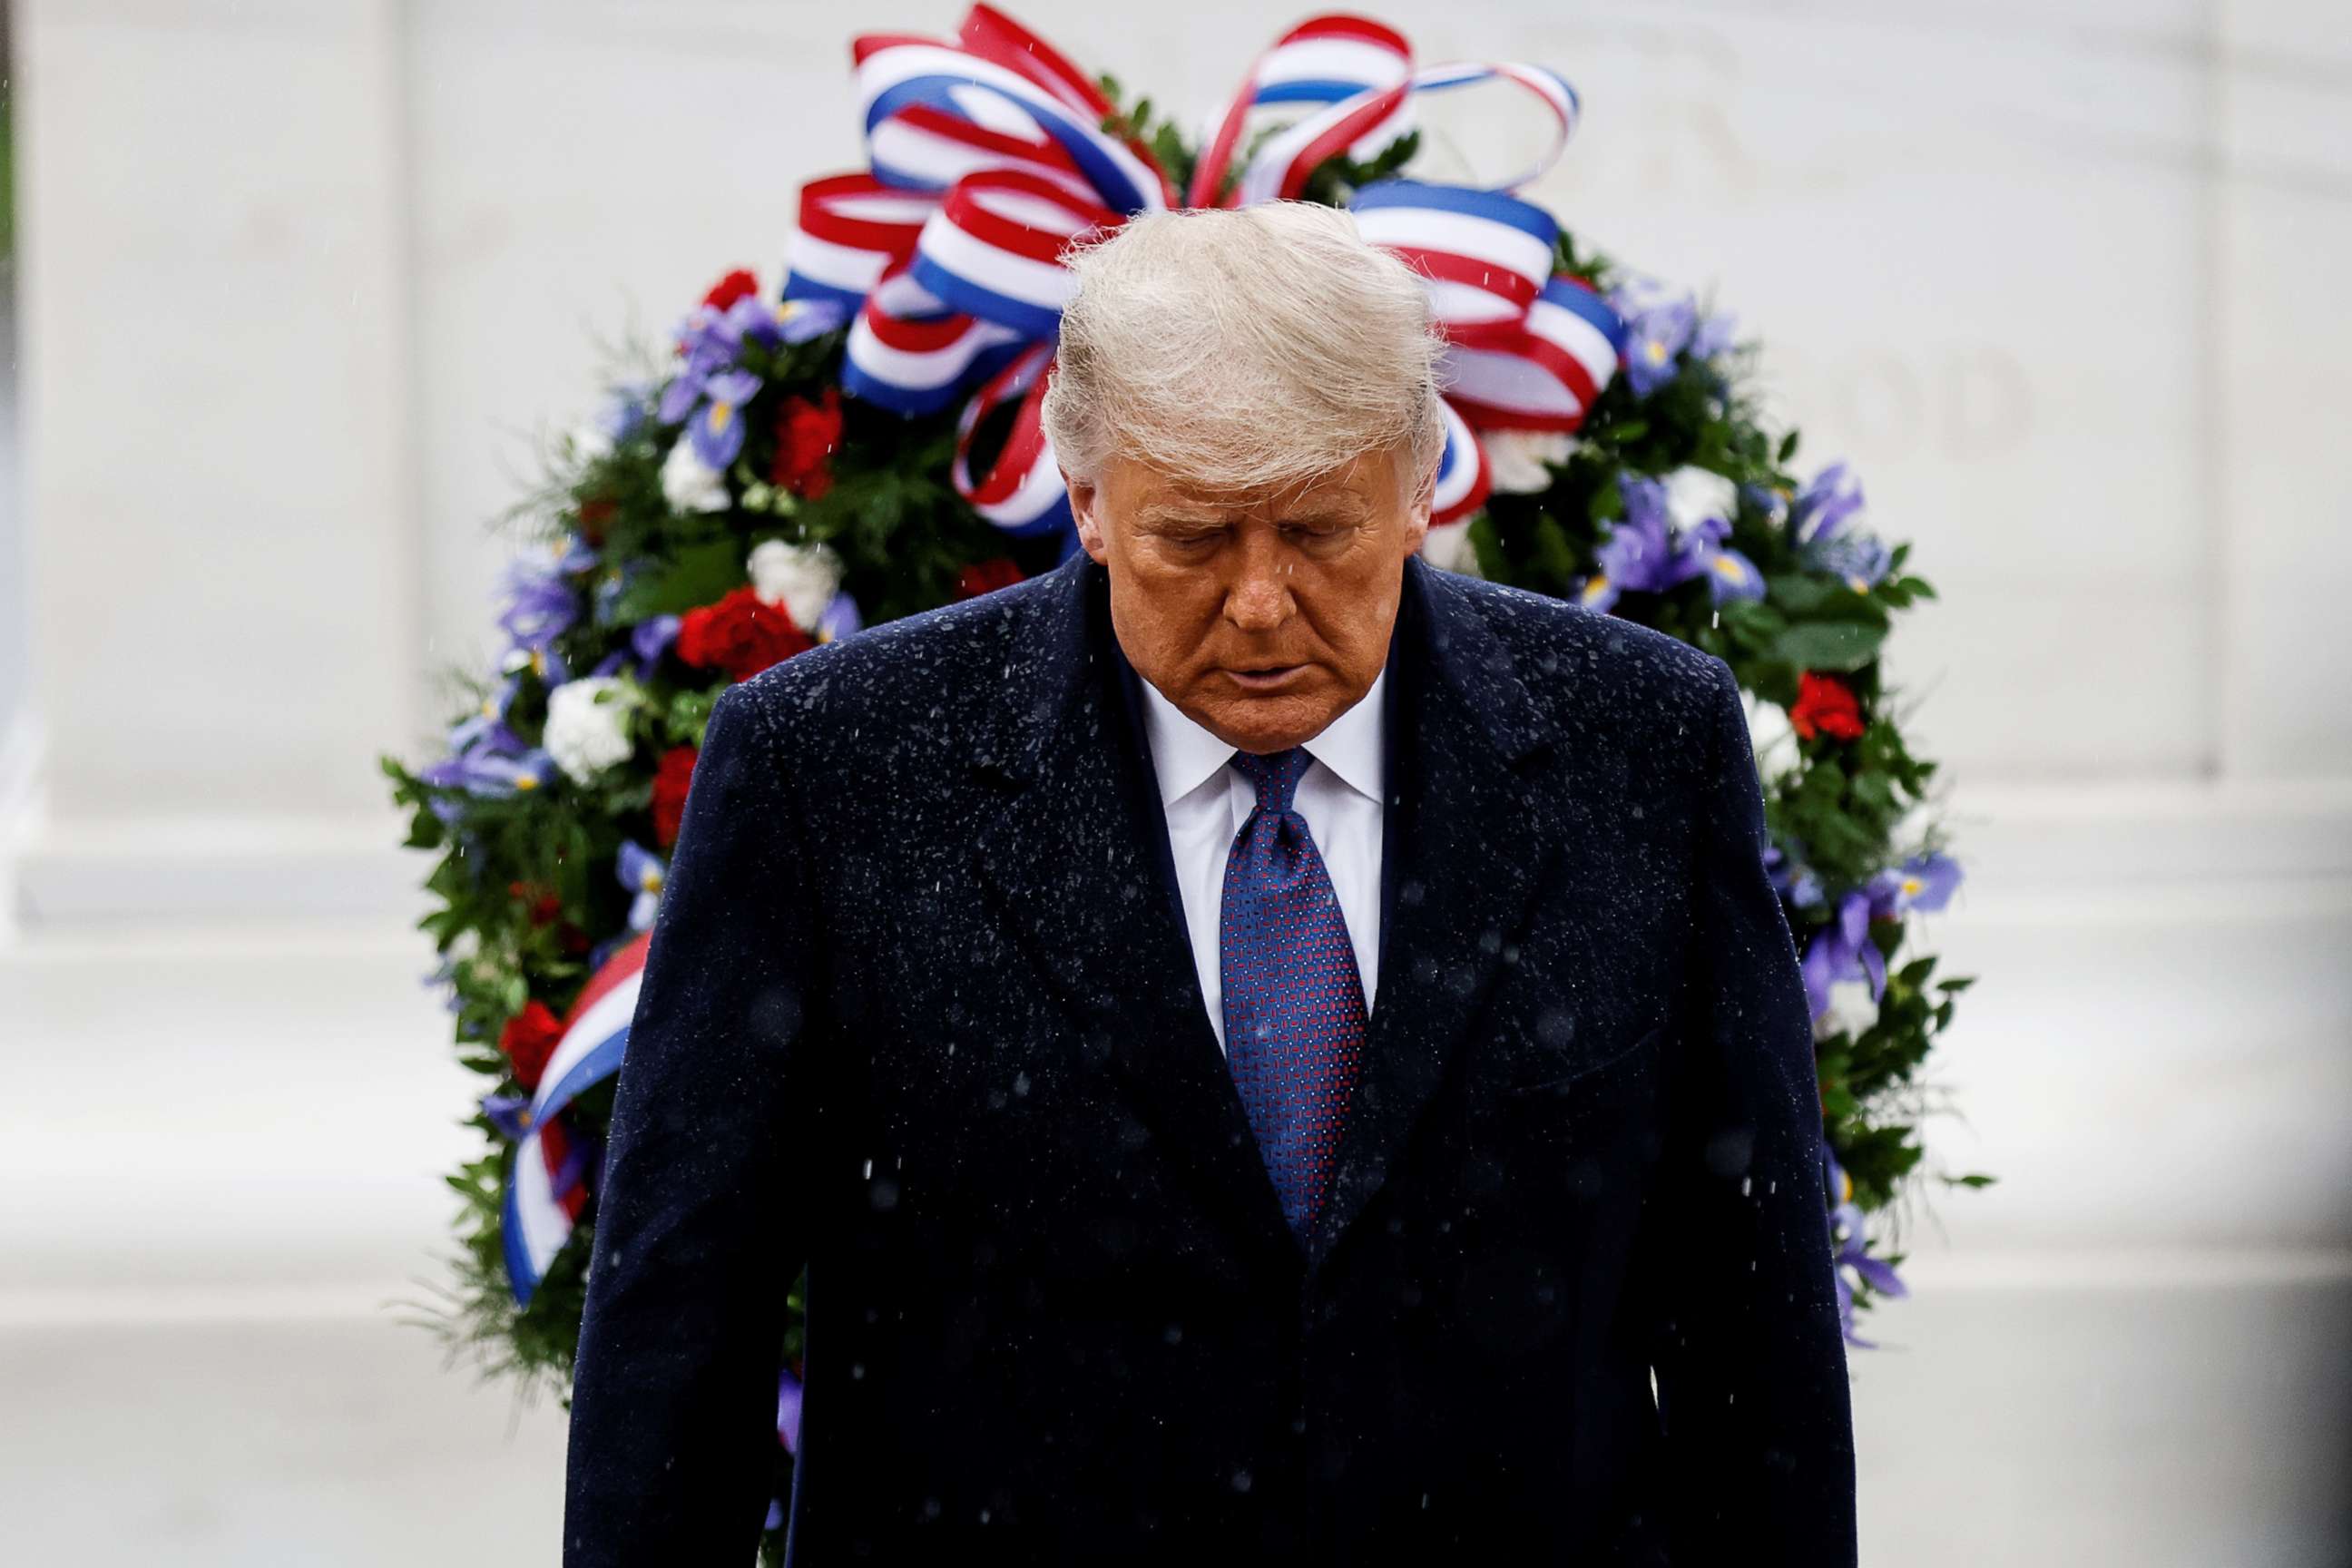 PHOTO: President Donald Trump turns away in the rain after laying a wreath at the Tomb of the Unknown Solider as he attends a Veterans Day observance in Arlington National Cemetery in Arlington, Va., Nov. 11, 2020.